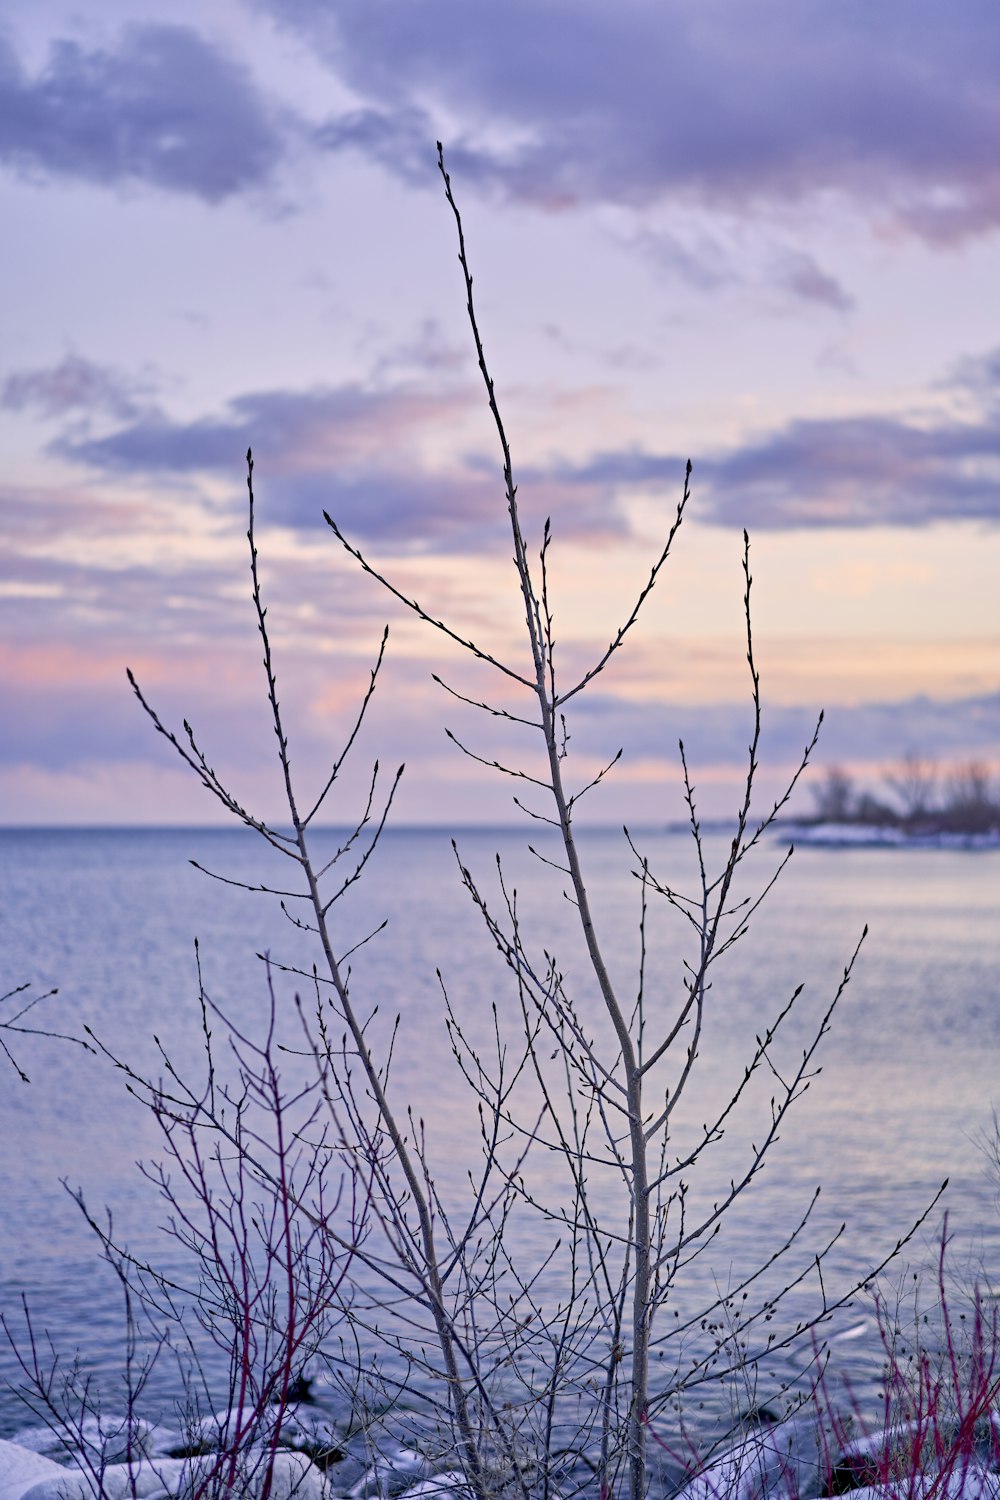 a tree with no leaves near a body of water